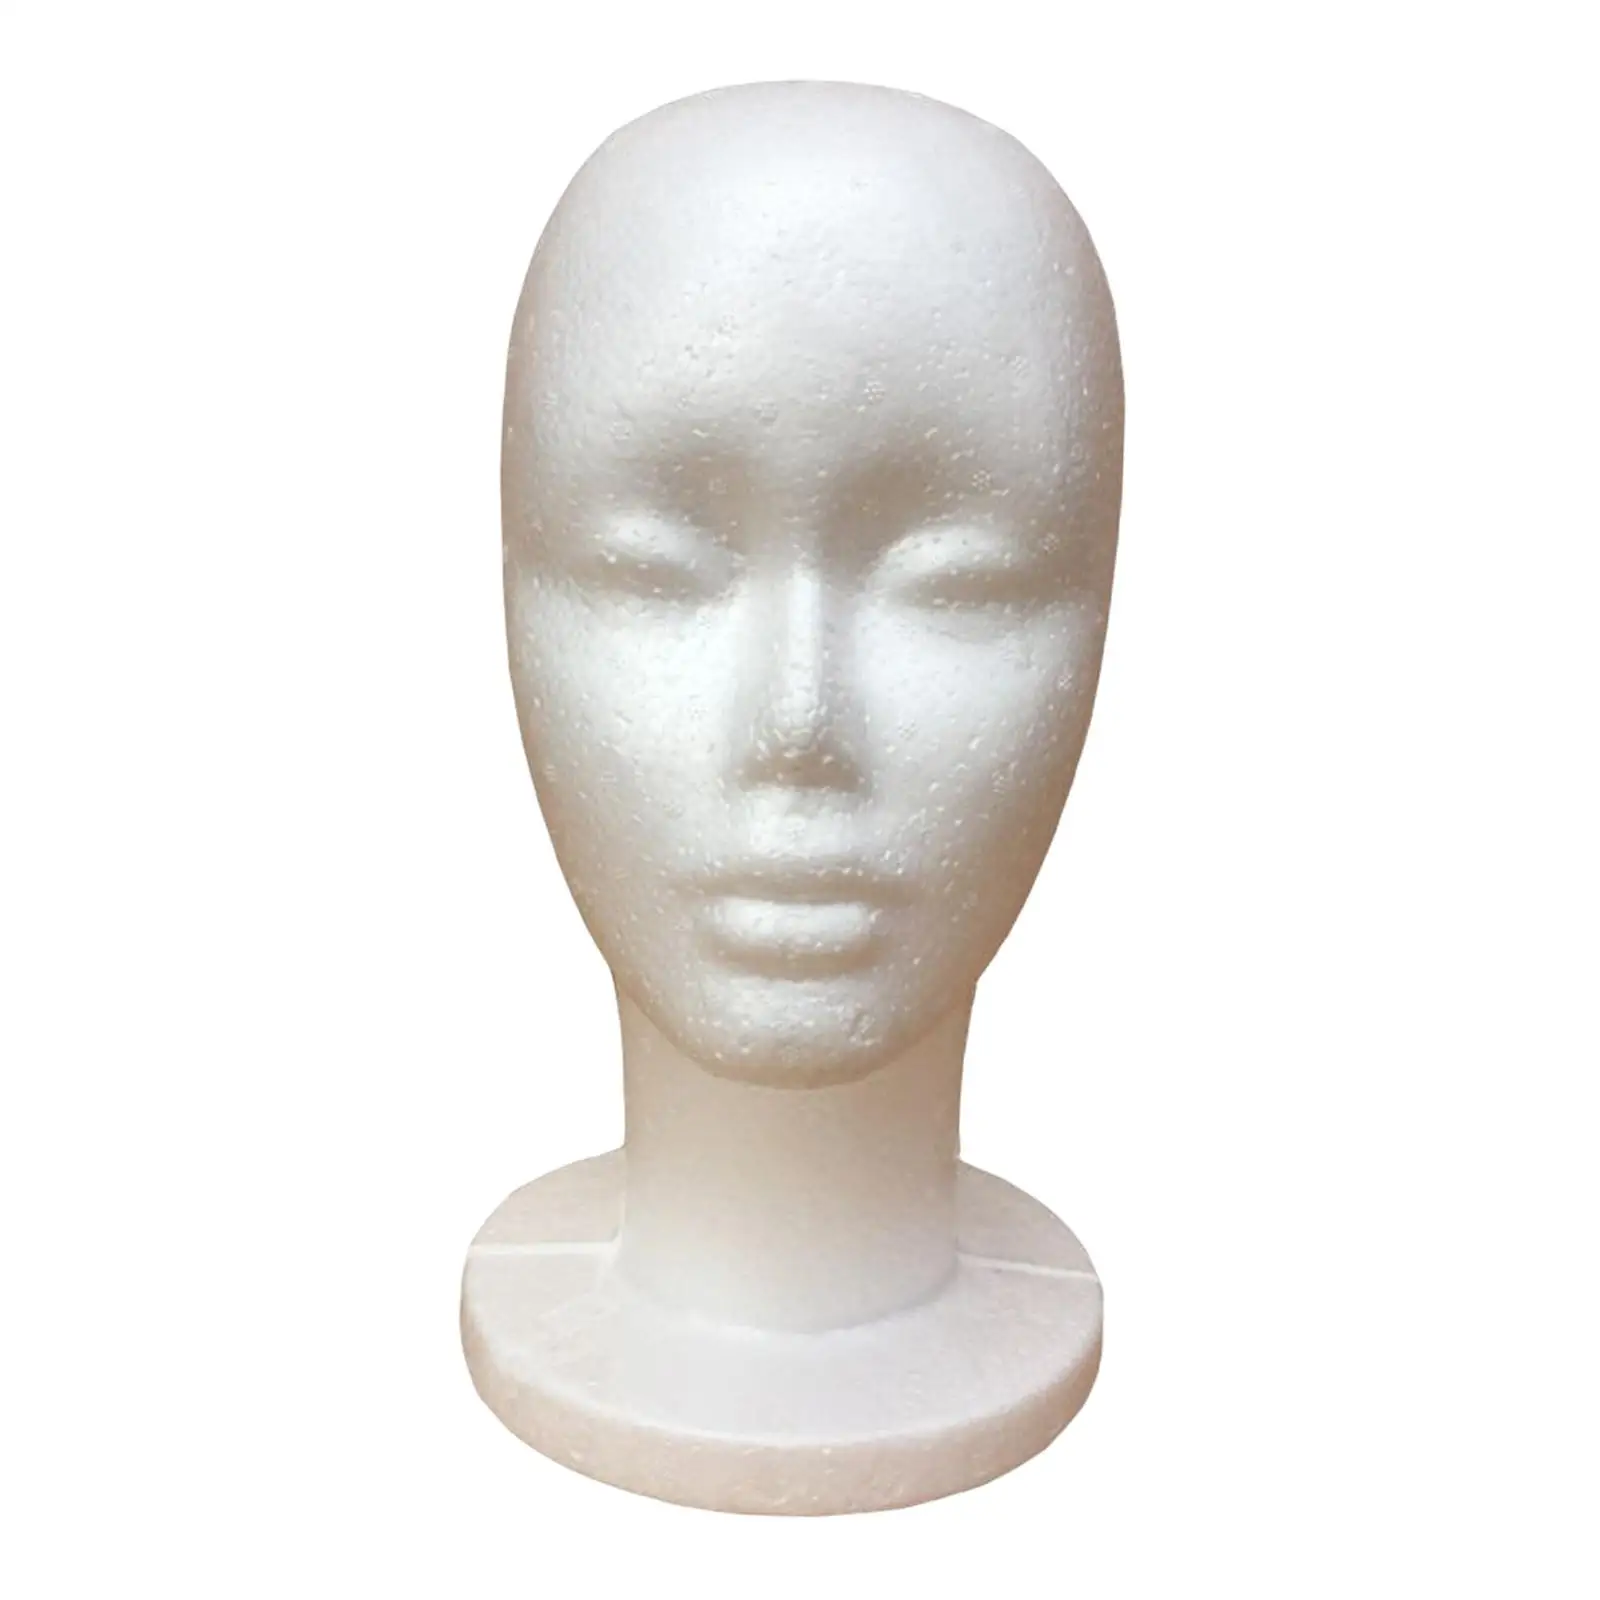 Female Foam Mannequin Head Model Smooth Durable Hat Wig Display Stand Display Wigs Hair Accessories Lightweight Hairpiece Stand